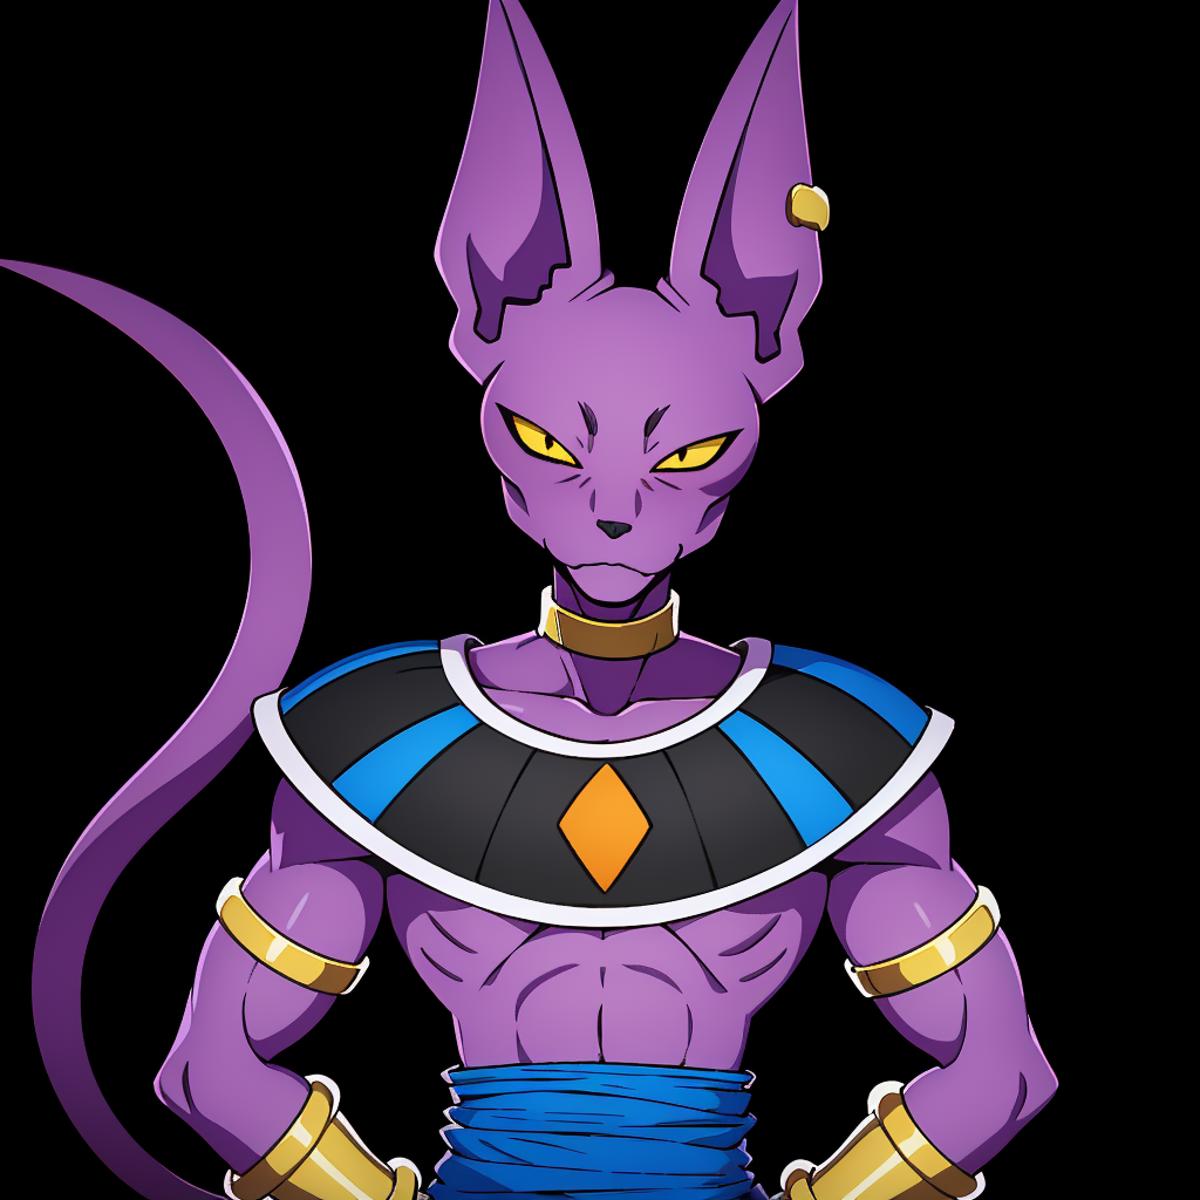 Beerus image by infamous__fish